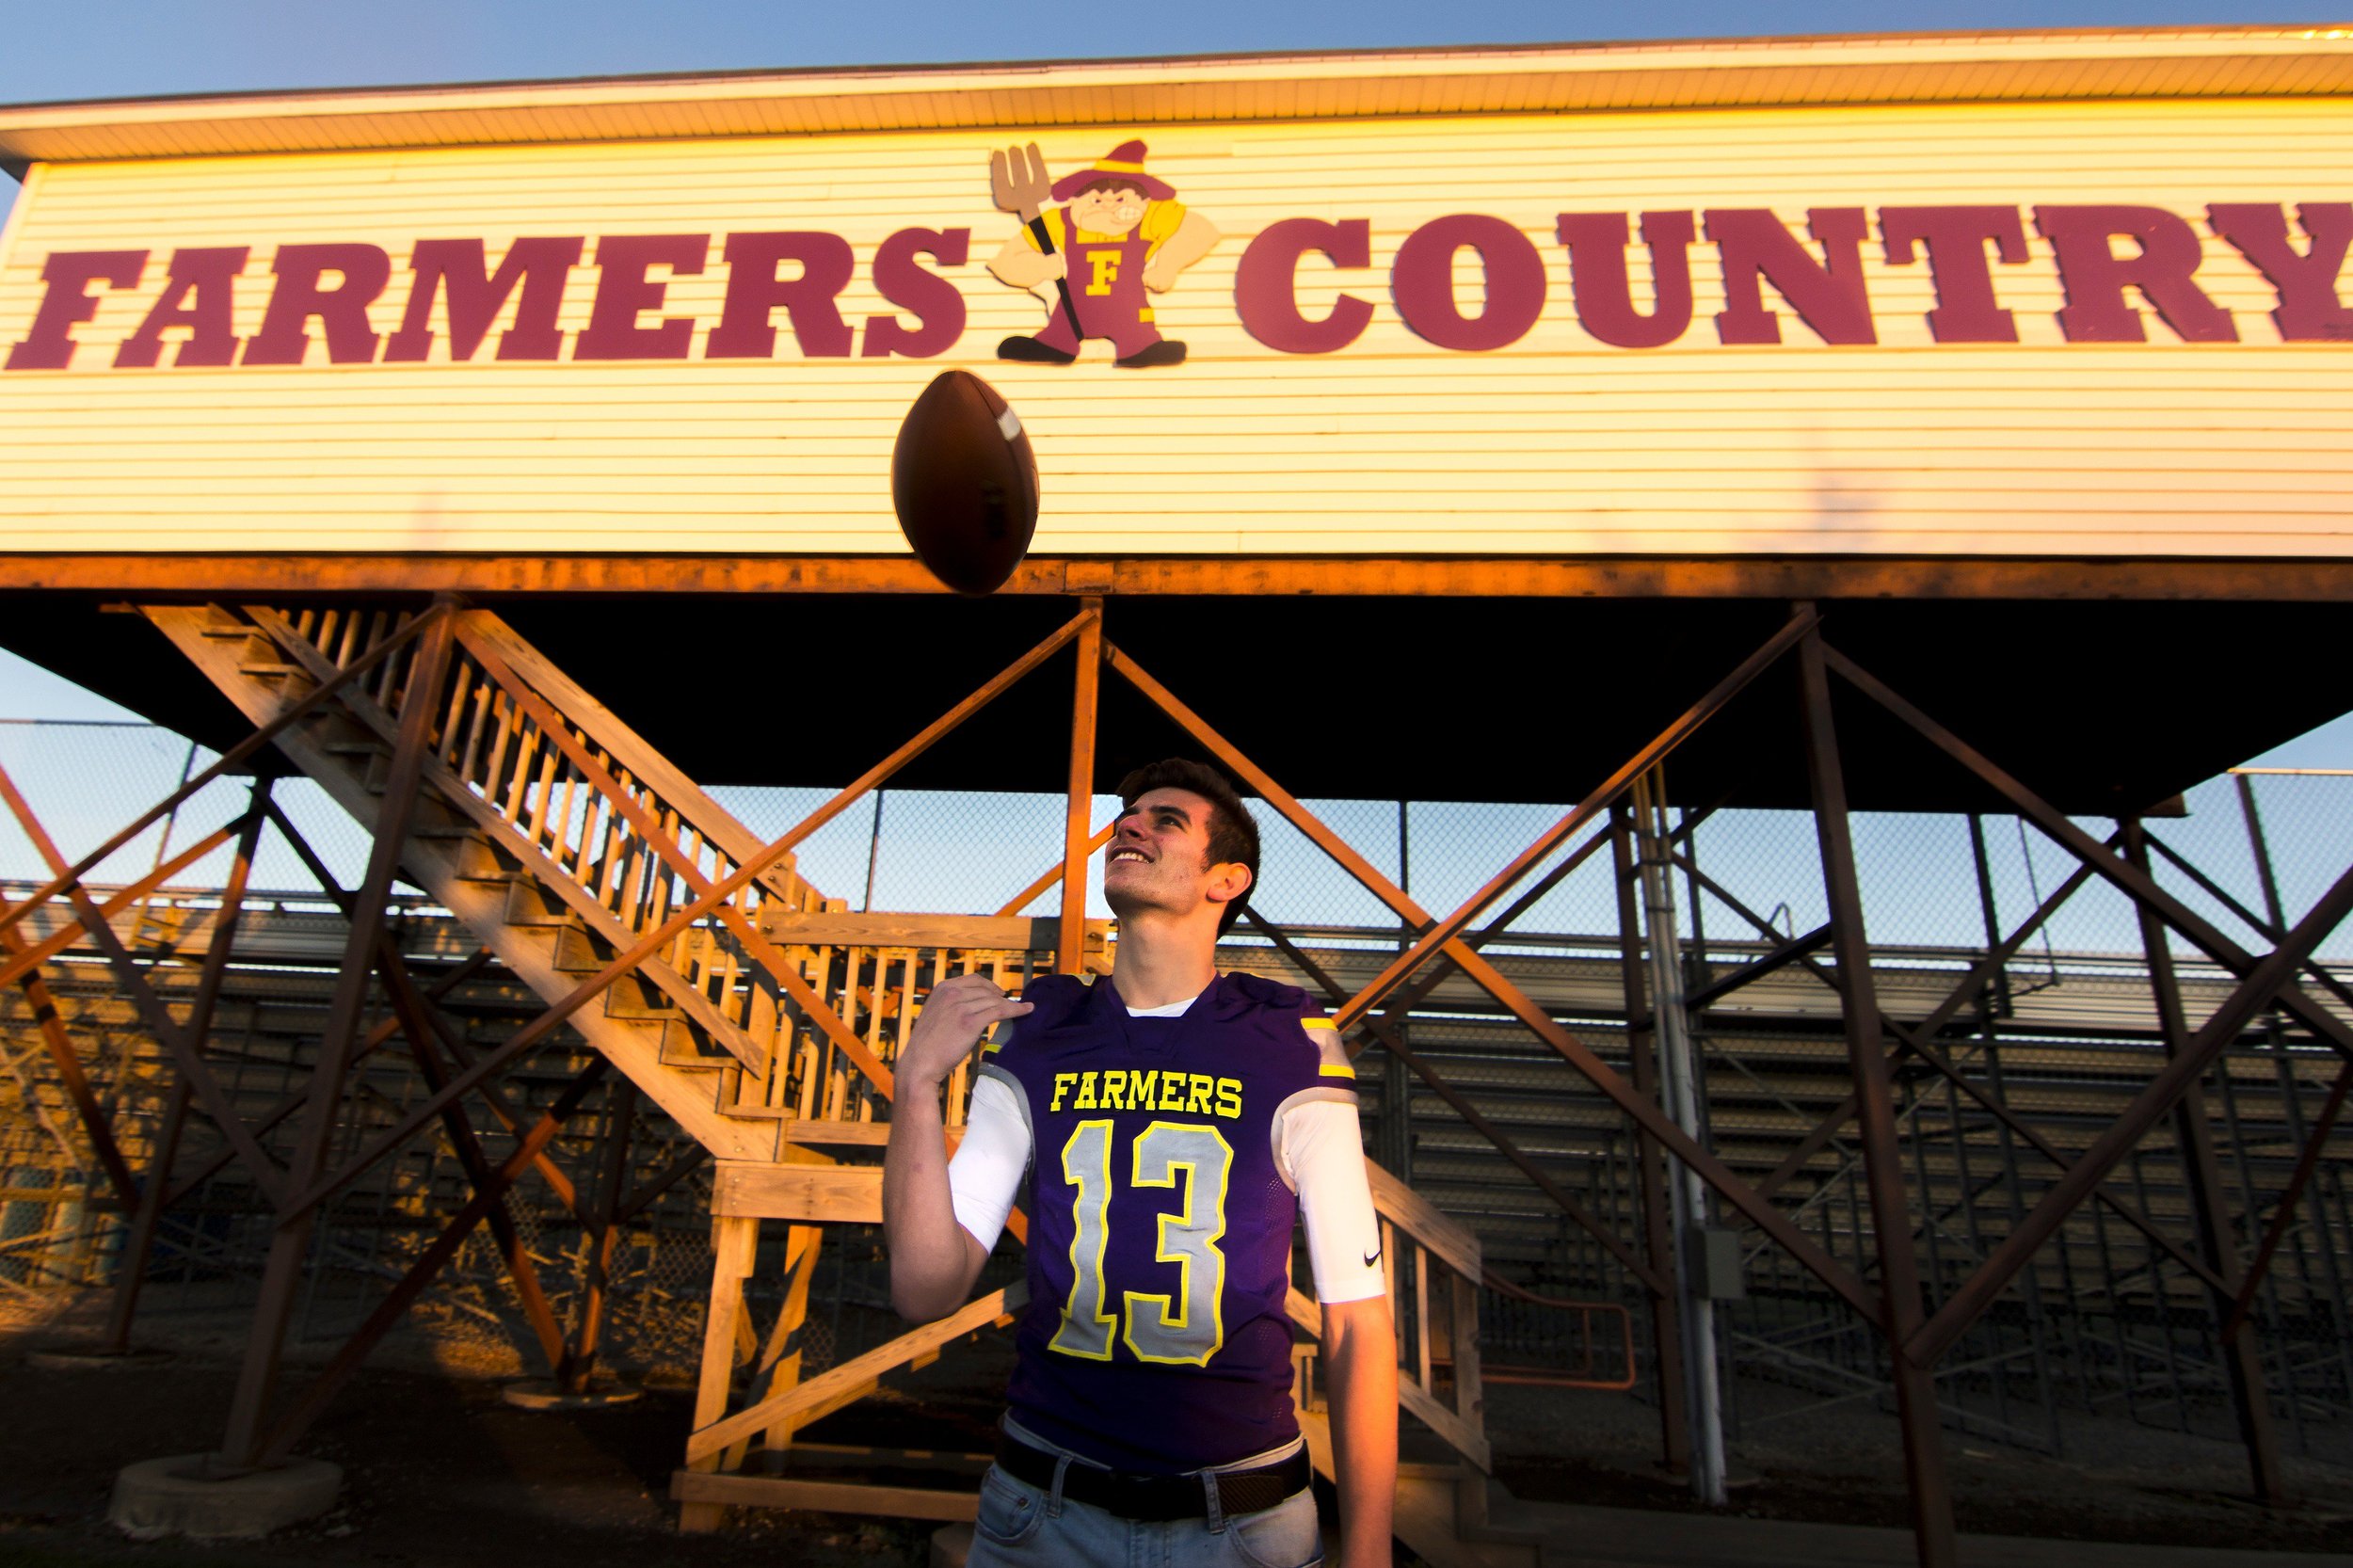  Farmington Community High School’s Dylan Hayden had a ball during his senior season, throwing for 3,412 yards and 42 touchdowns, as the Farmers made it to the IHSA Class 3A quarterfinals. He is the 2016 Journal Star Small-School Football Player of t